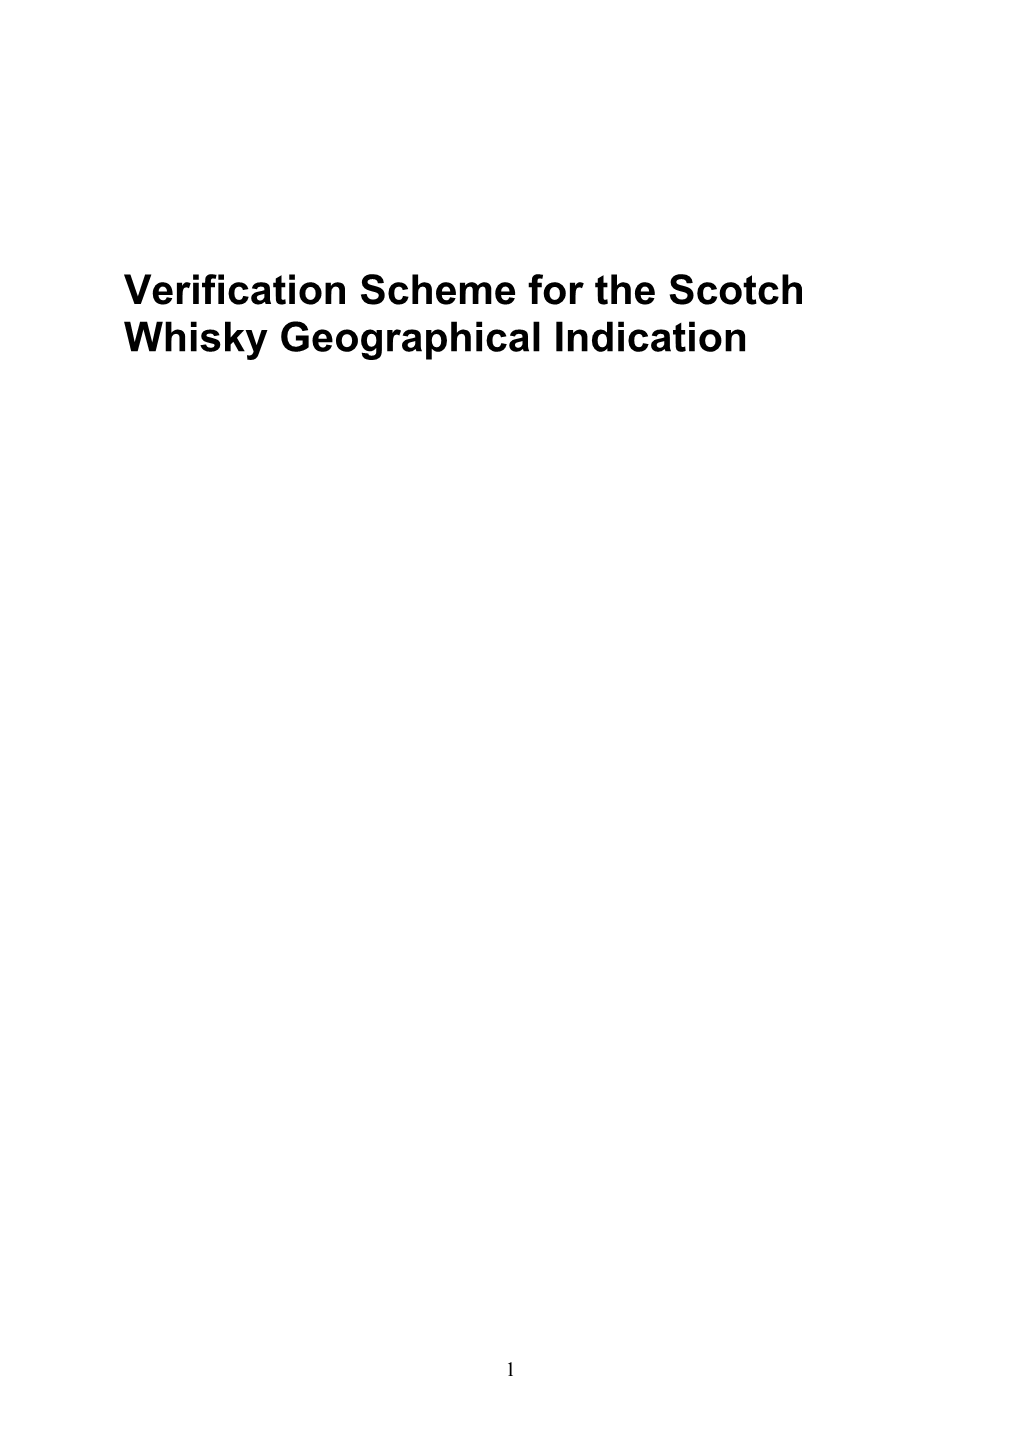 Verification Scheme for the Scotch Whisky Geographical Indication